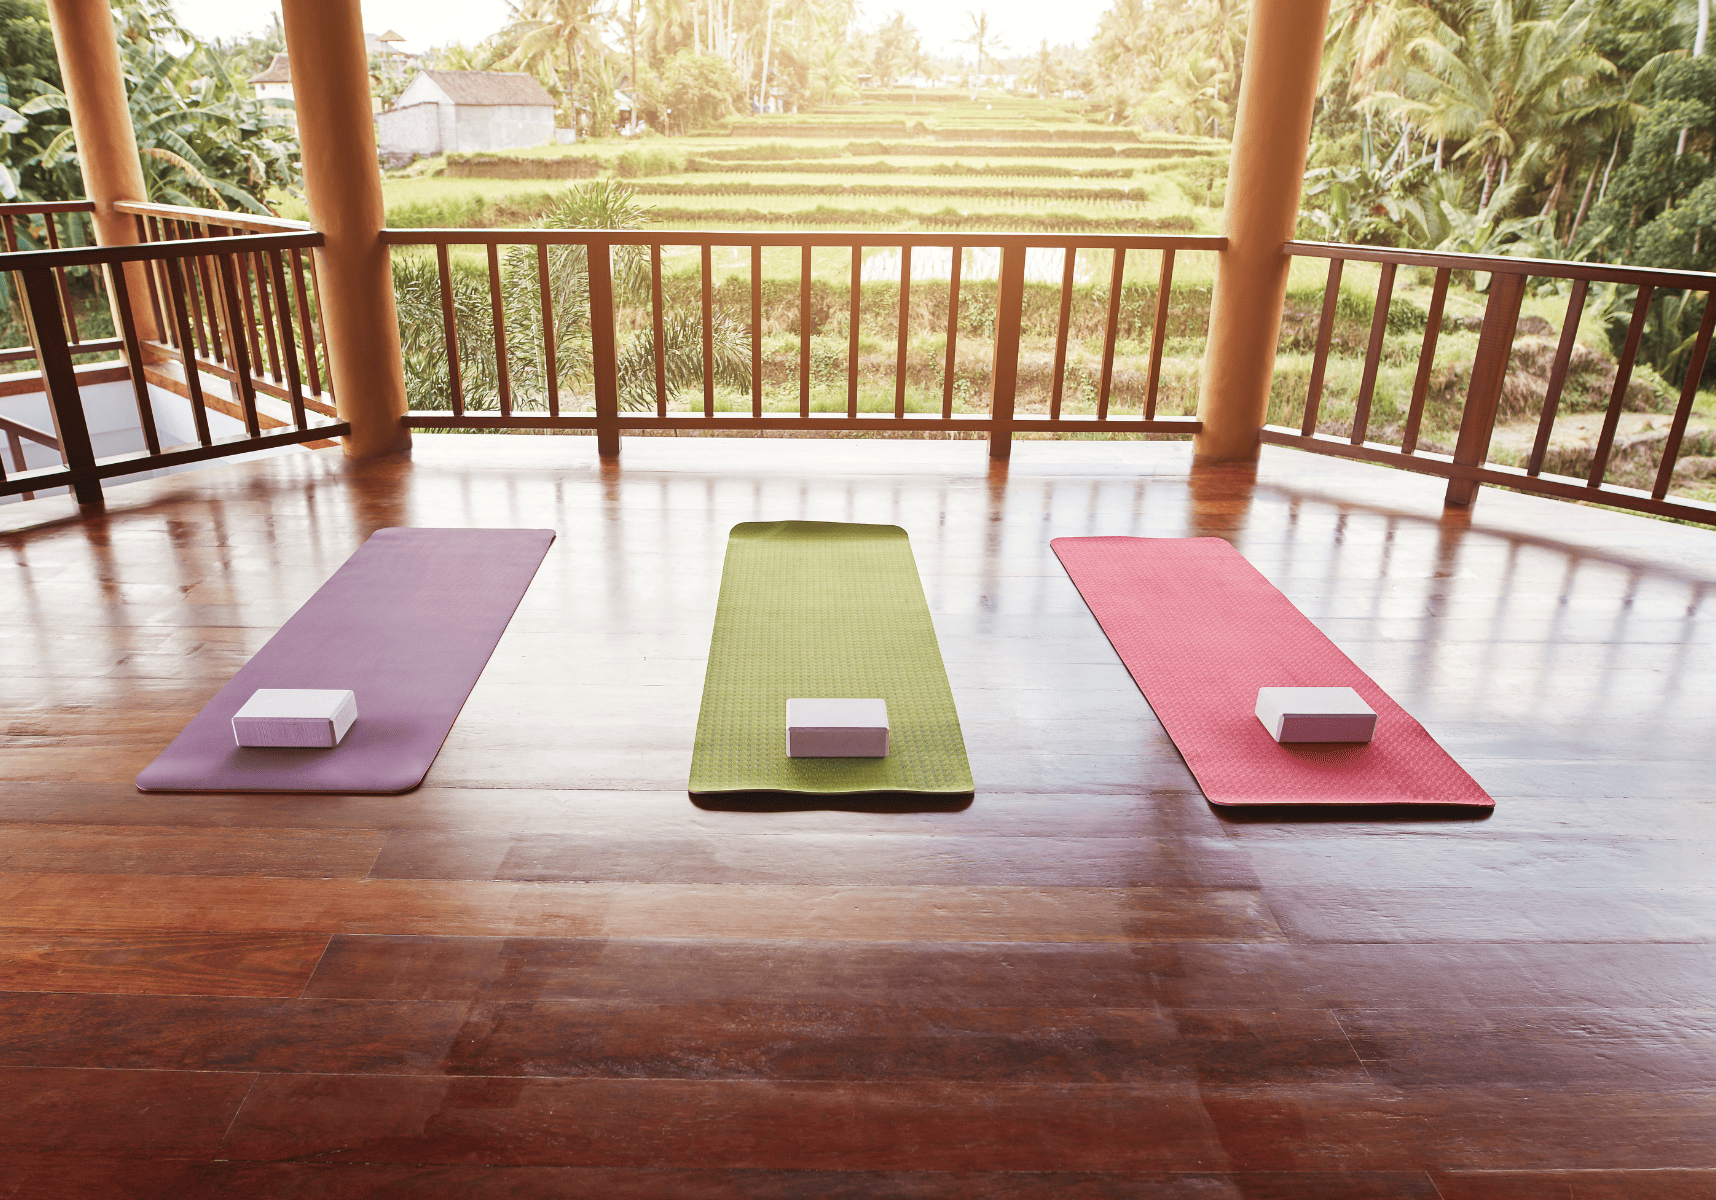 Modern yoga studio, serene space with yoga mats laid out under the